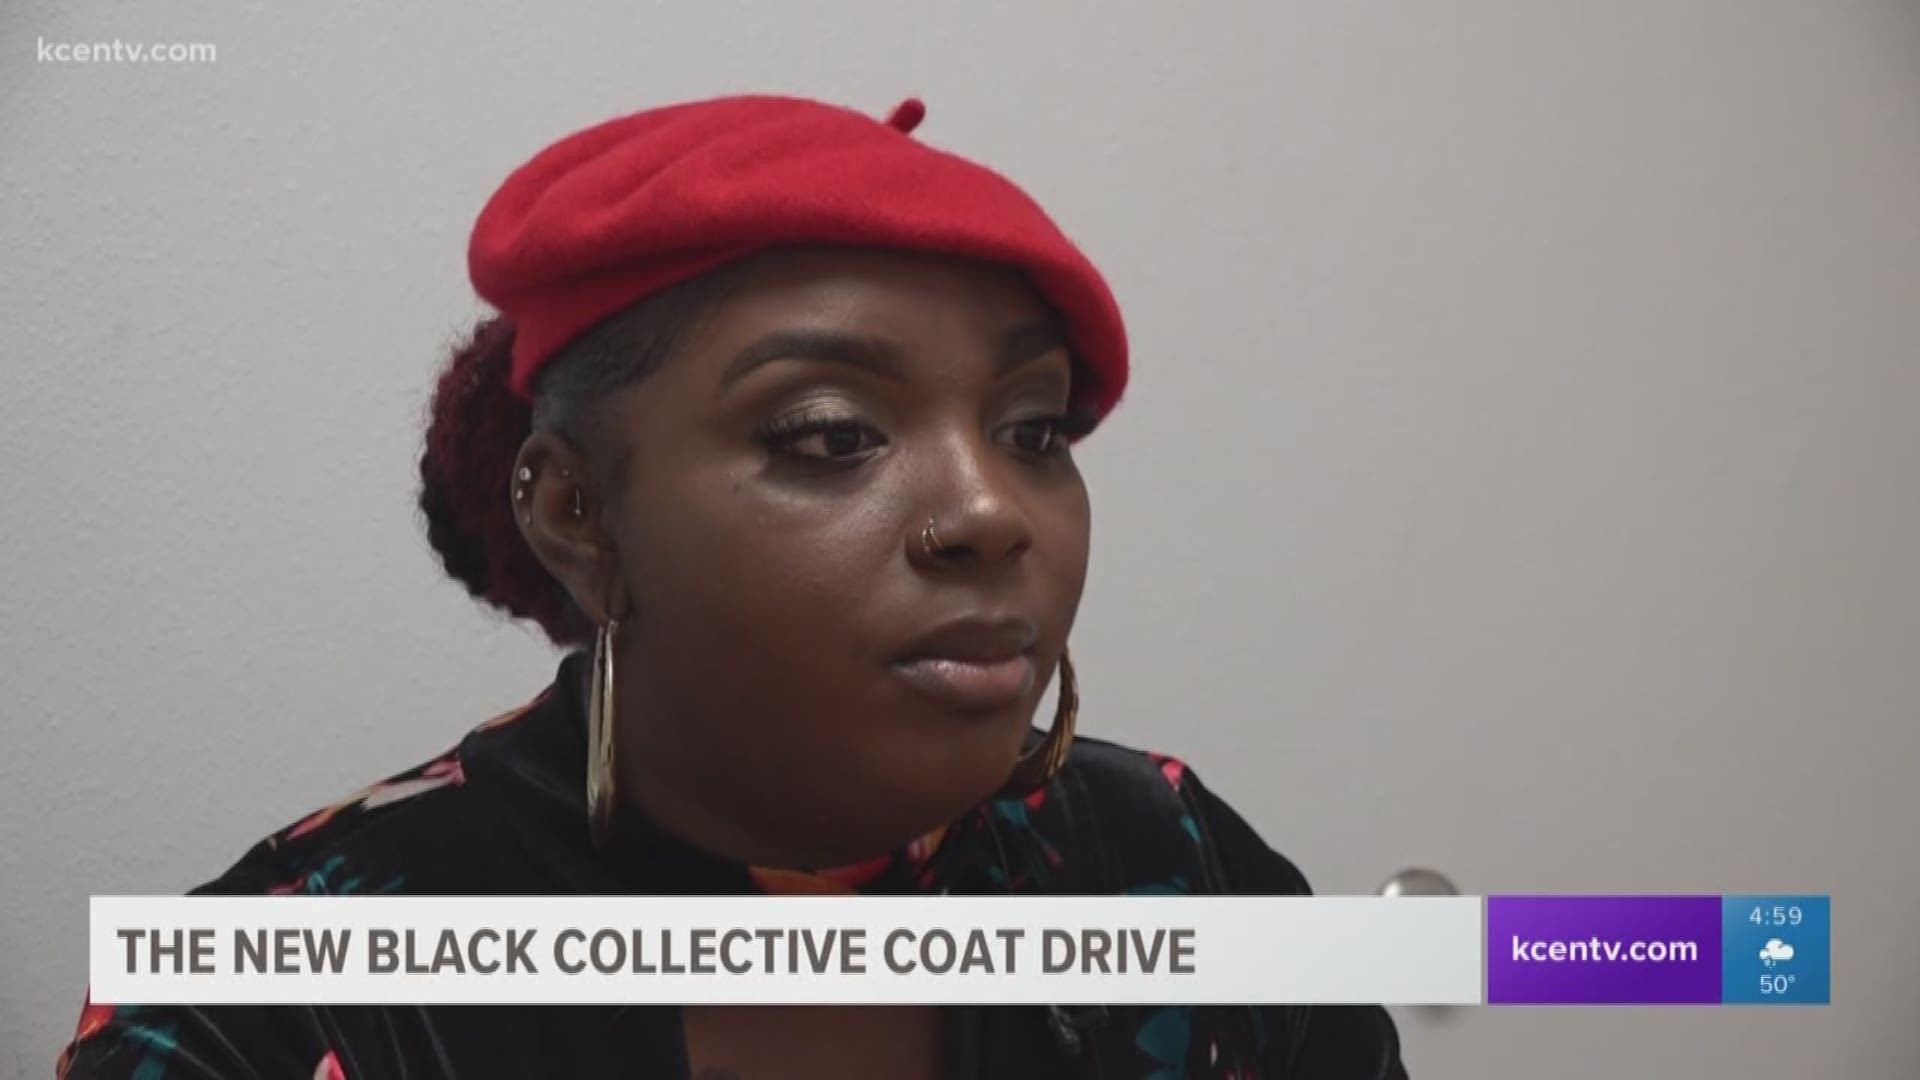 The collective coat drive